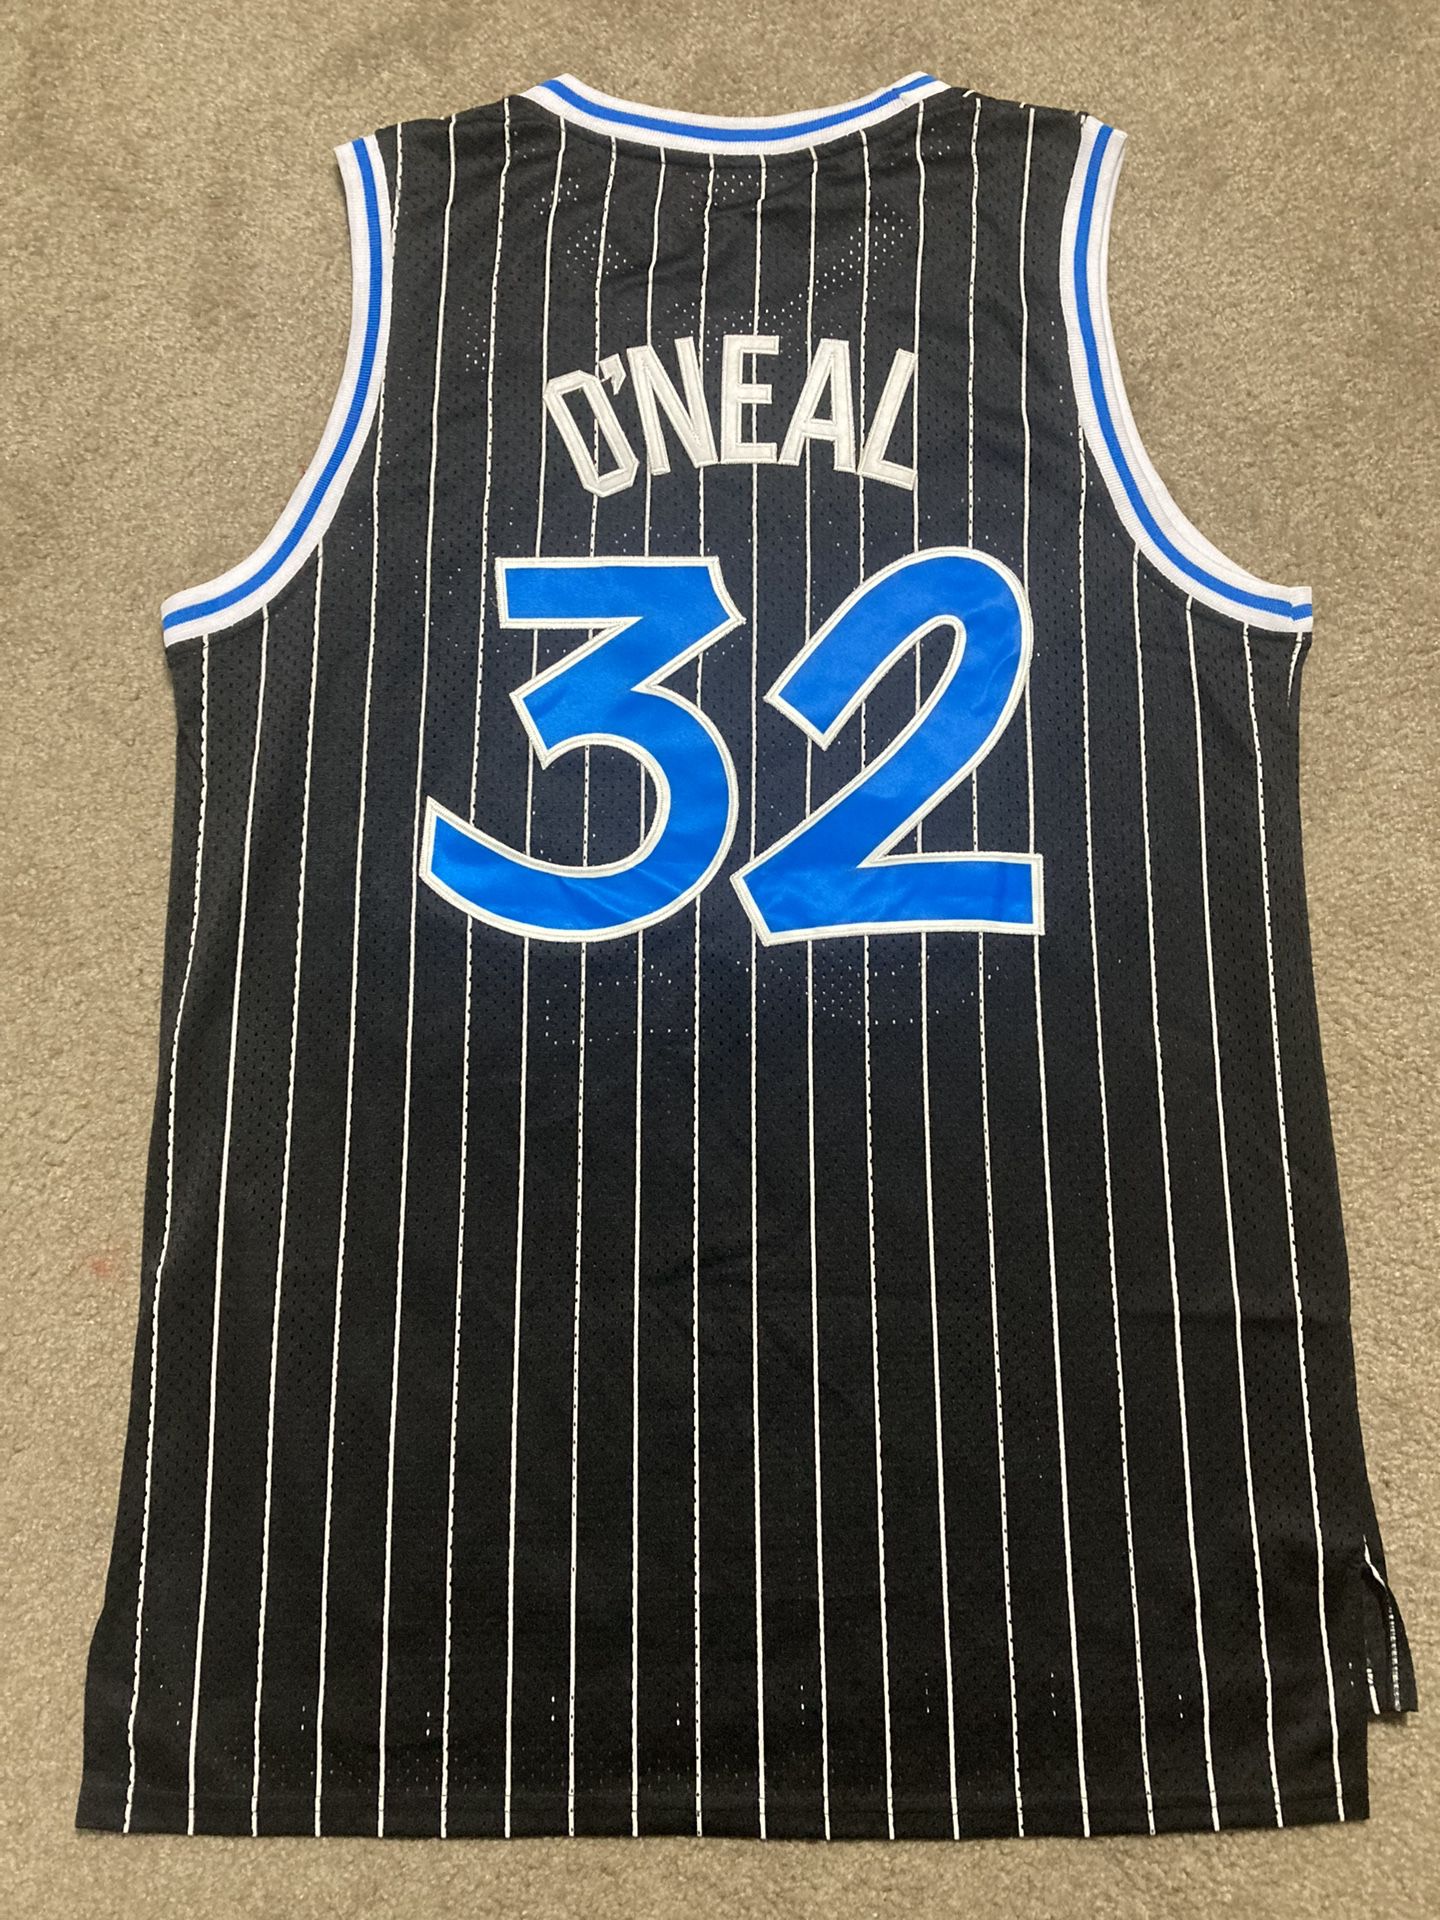 Retro Throwback Shaquille O'Neal Orlando Magic Basketball Jersey for Sale  in Mesa, AZ - OfferUp